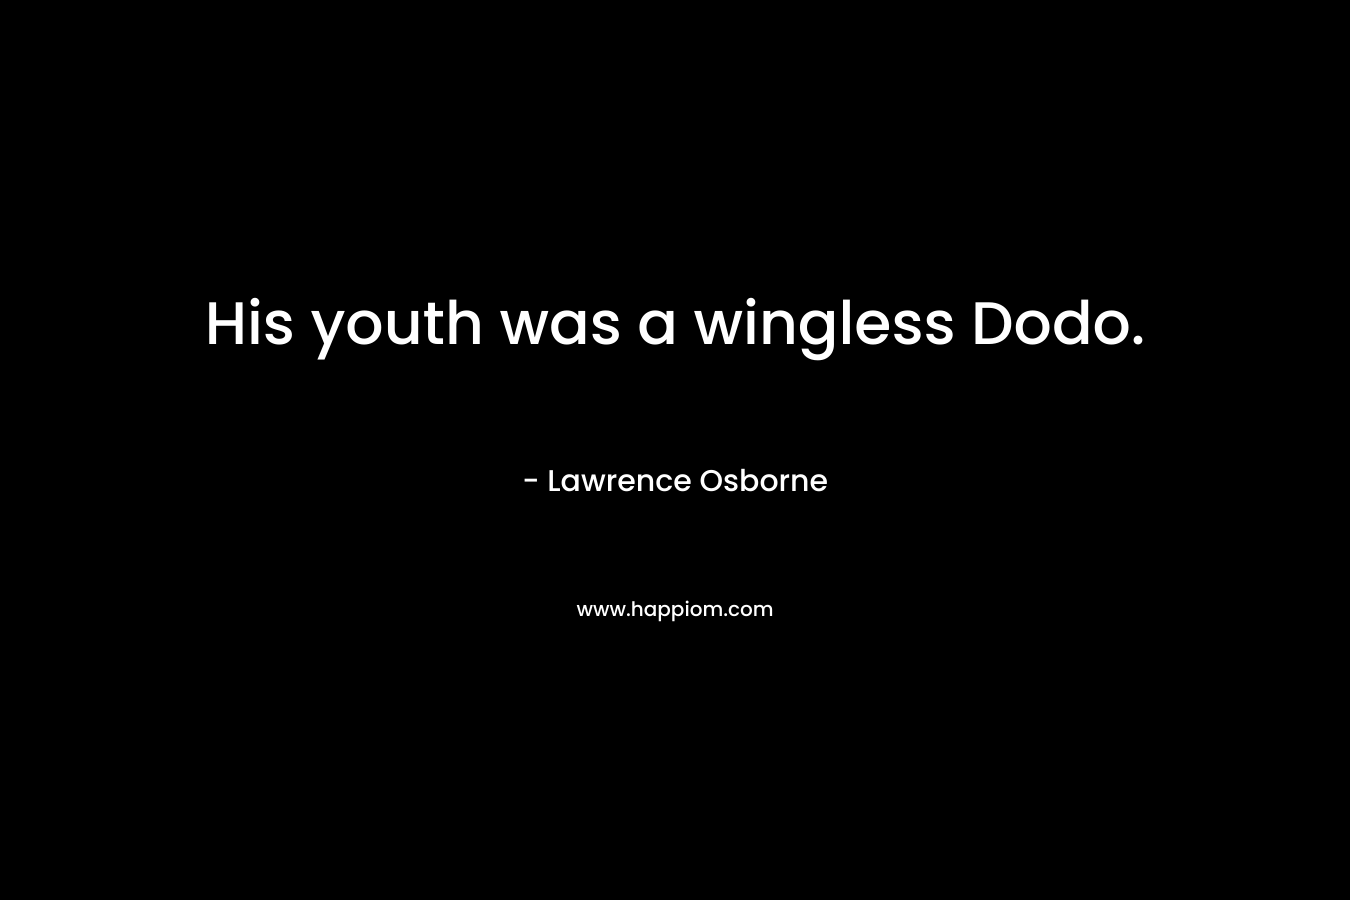 His youth was a wingless Dodo. – Lawrence Osborne